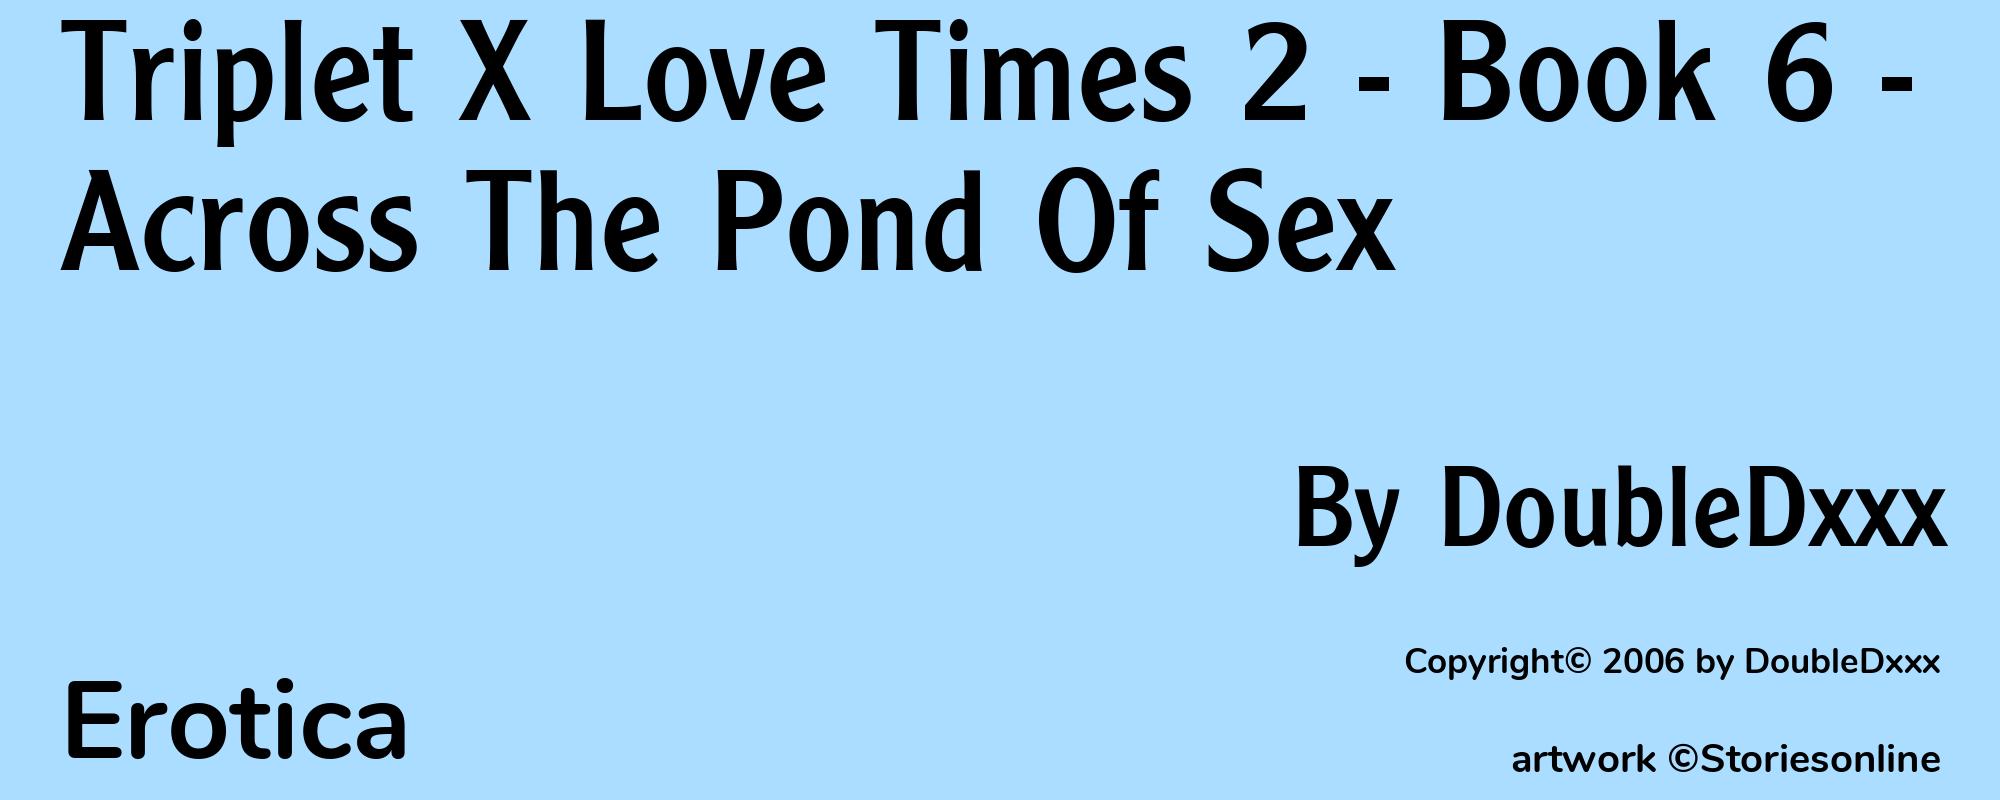 Triplet X Love Times 2 - Book 6 - Across The Pond Of Sex - Cover